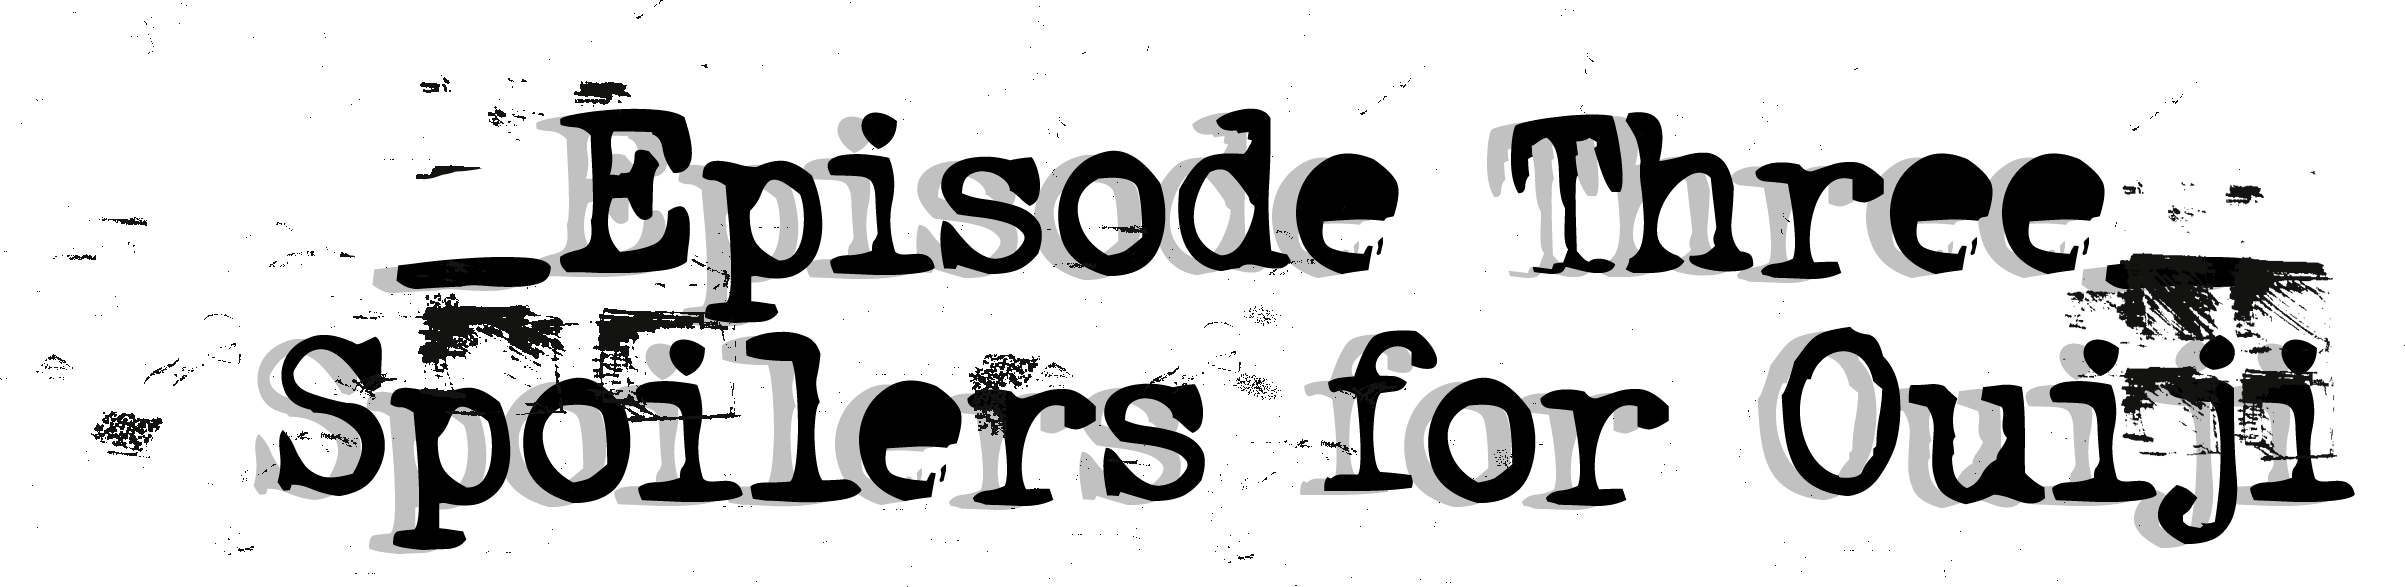 Episode Three: Spoilers for Ouija